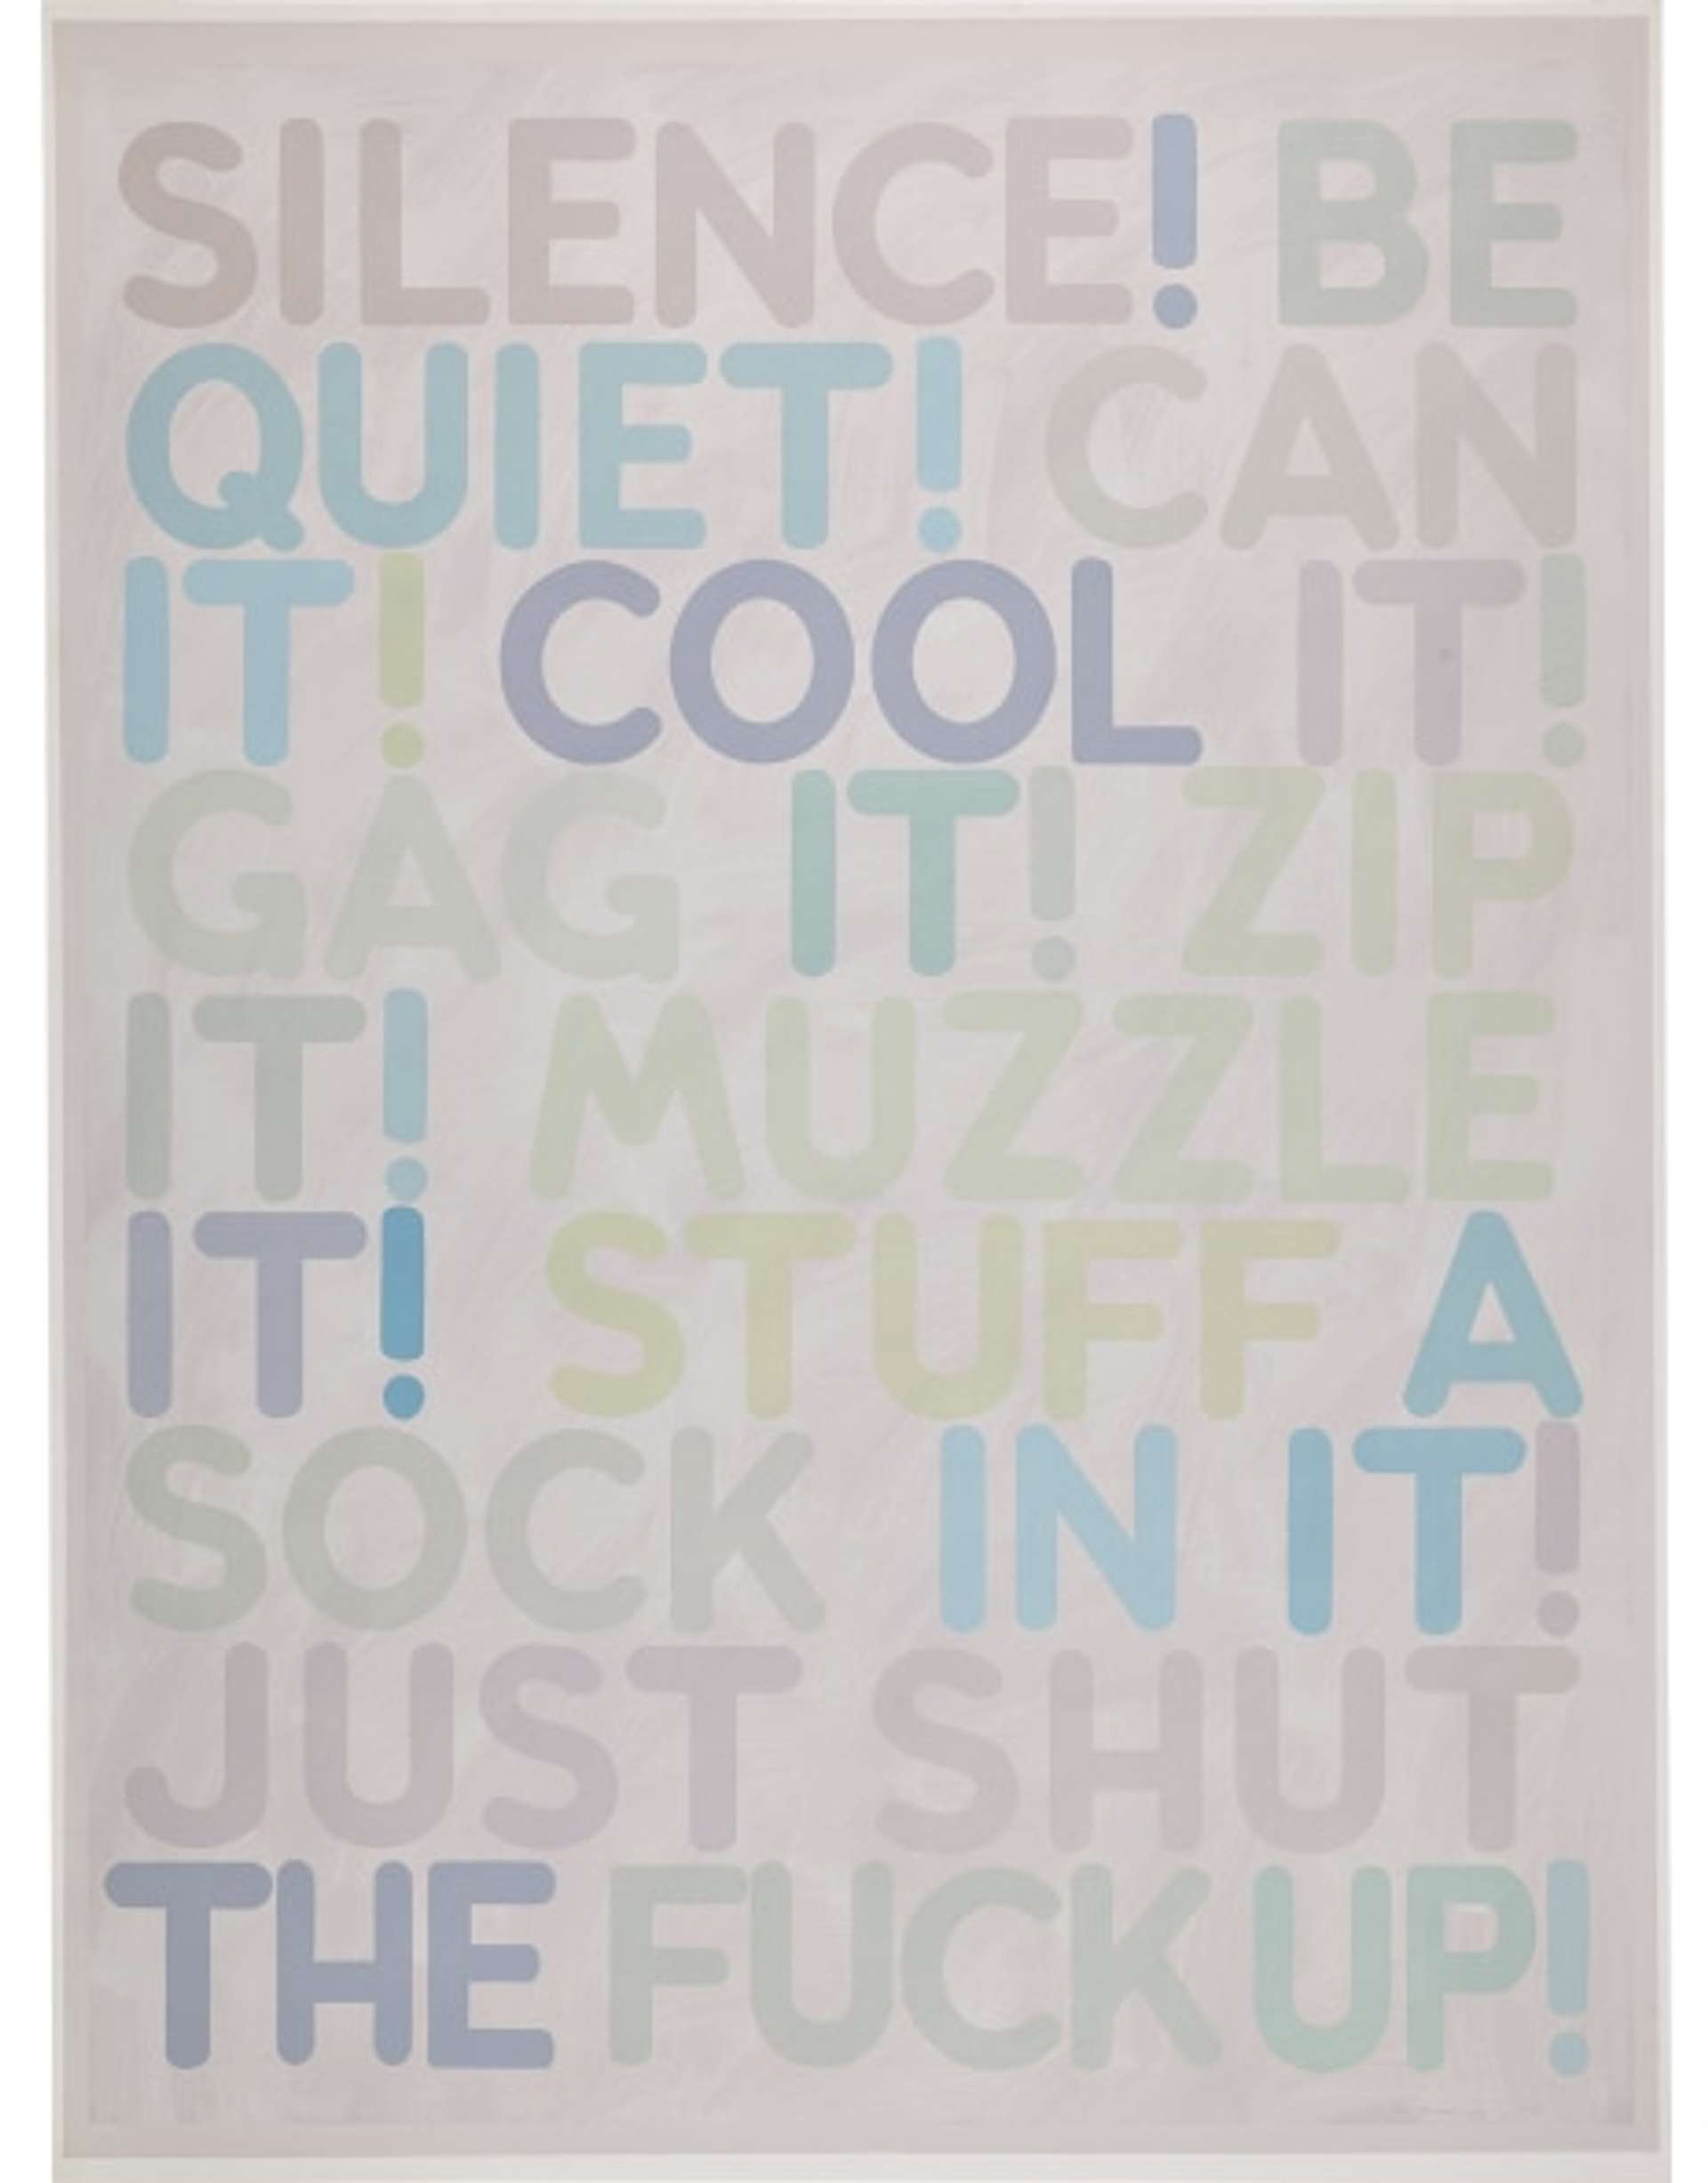 A textual artwork with a white background featuring pastel-colored stenciled words in all capitals. The phrases include "SILENCE! BE QUIET! CAN IT! COOL IT" and more.